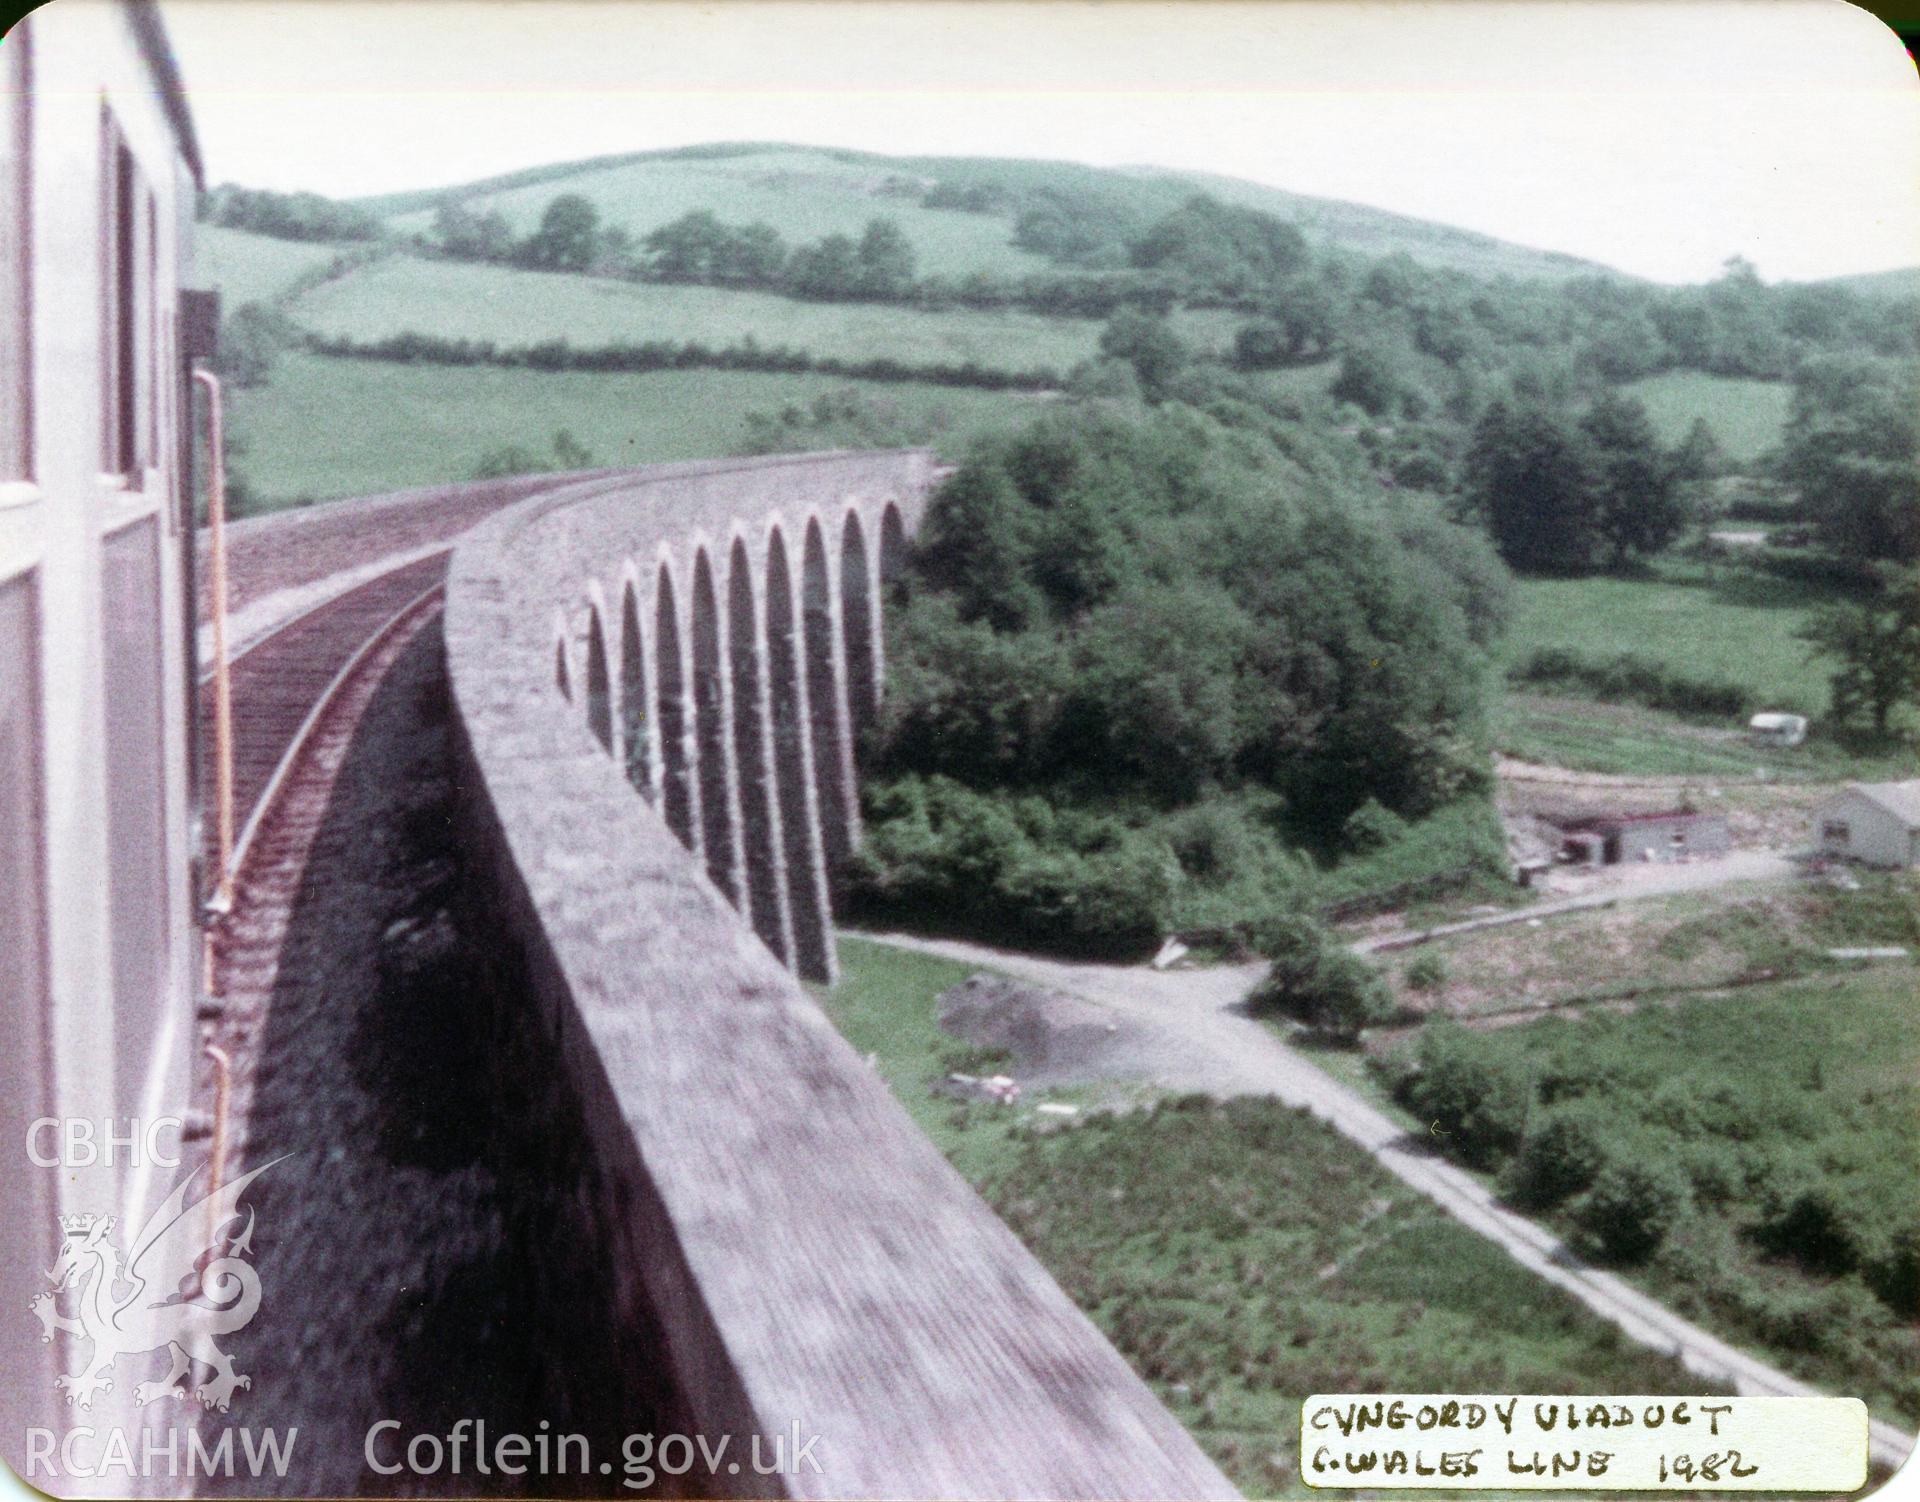 Digital photograph showing Cynhordy viaduct, dated 1982.